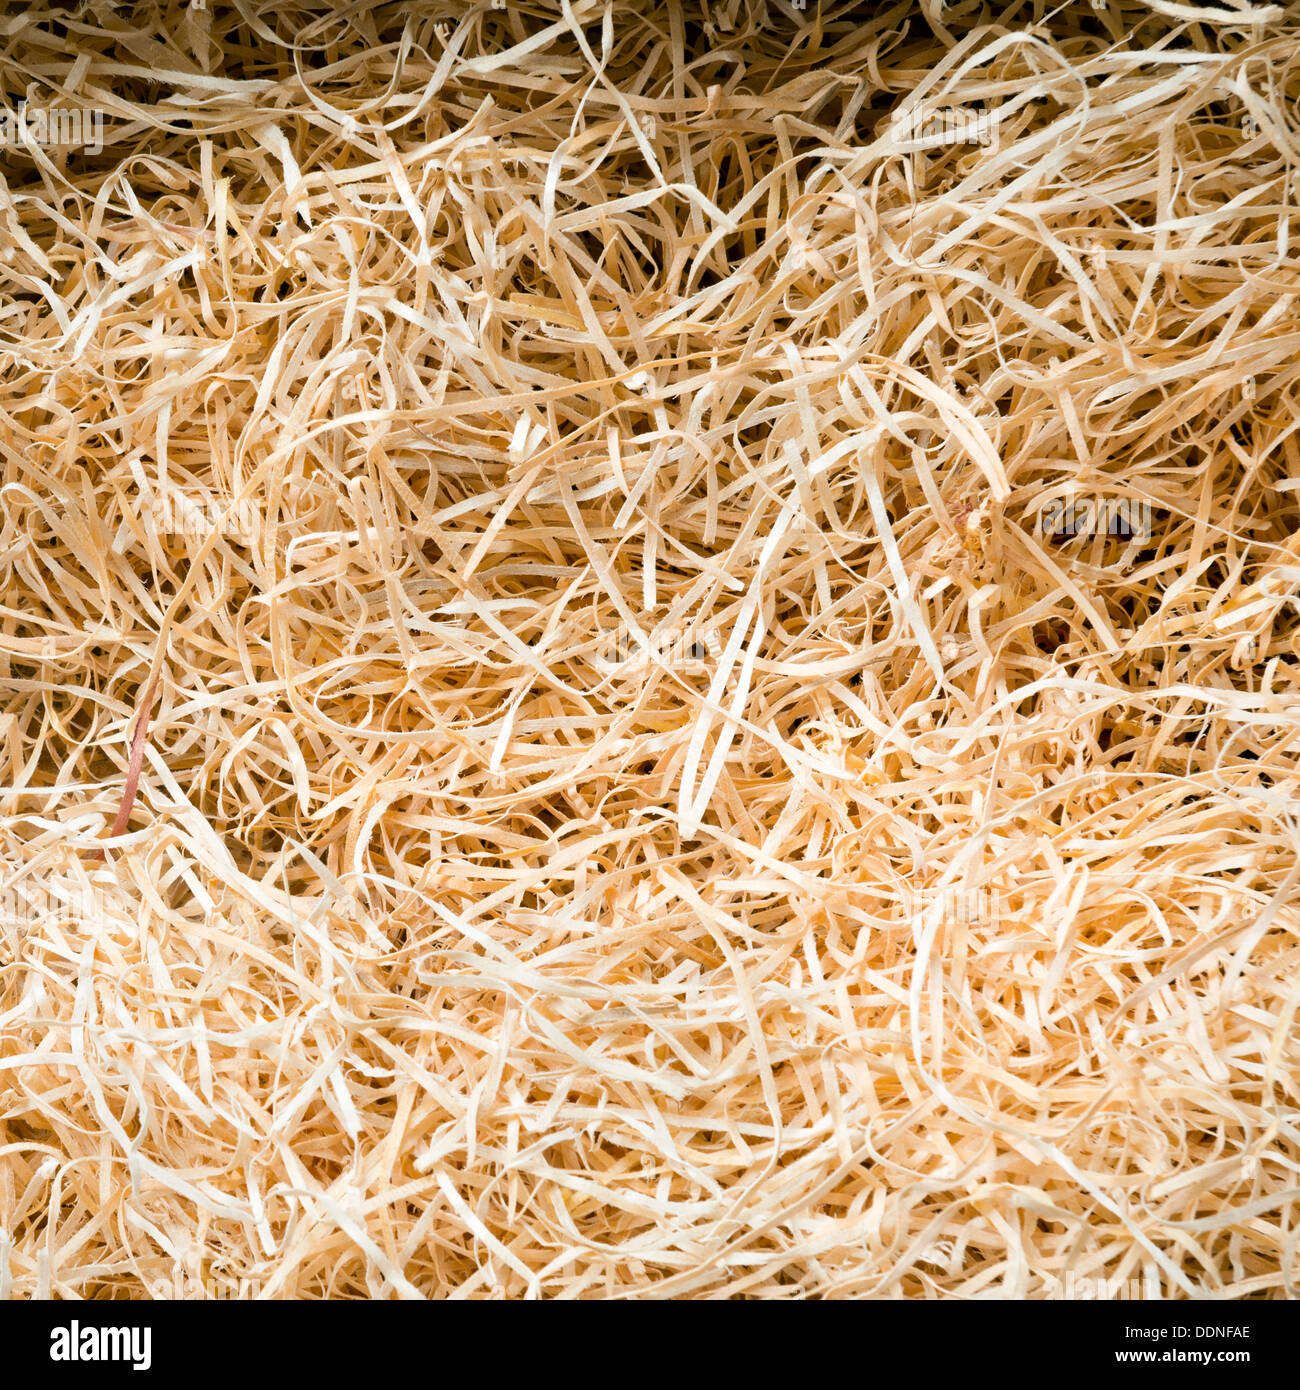 Raffia or twine all bundled up as a background Stock Photo